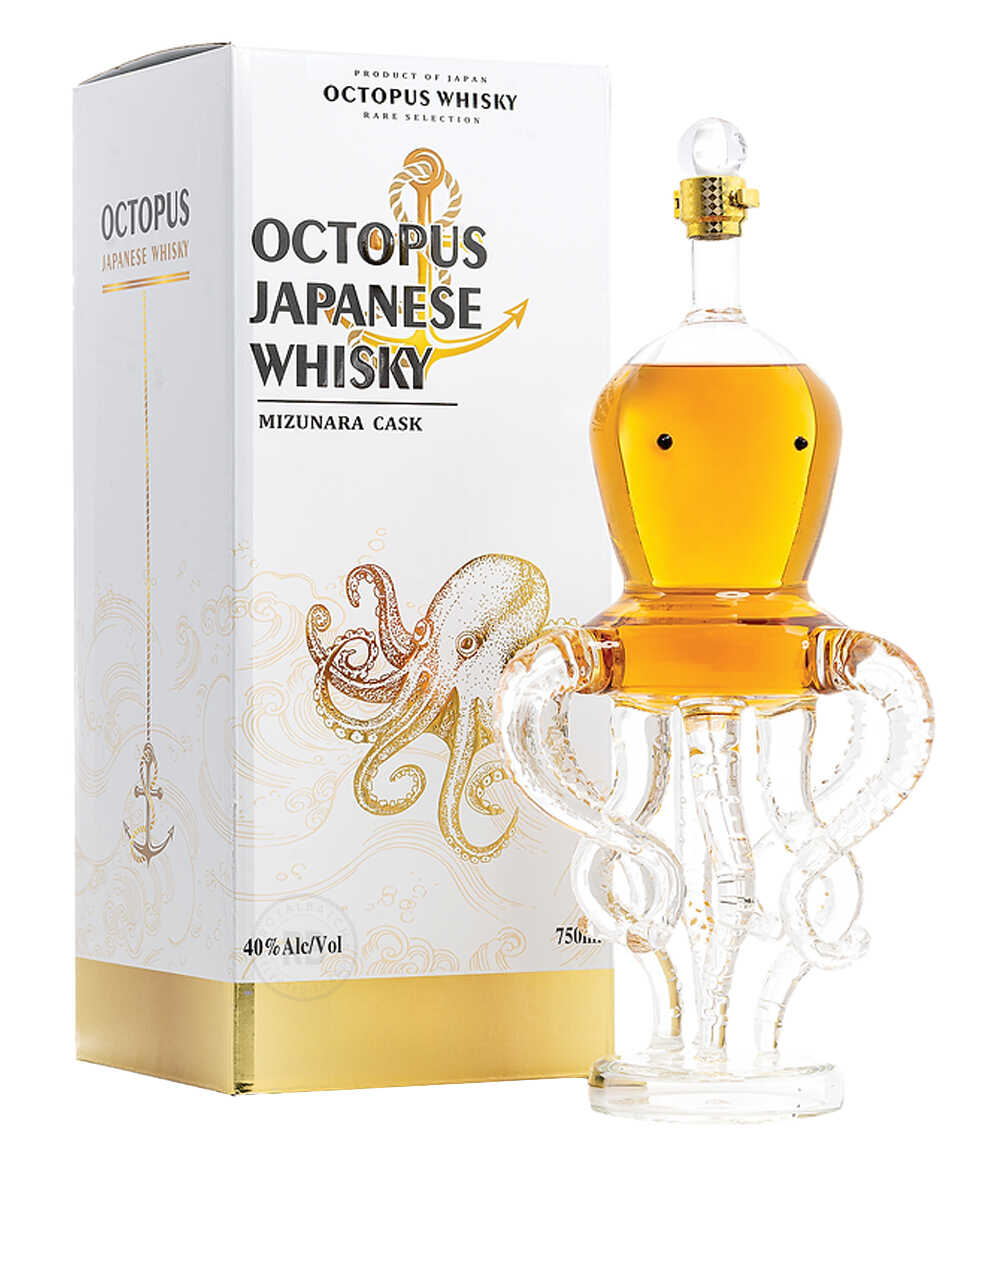 Octopus Japanese Whisky